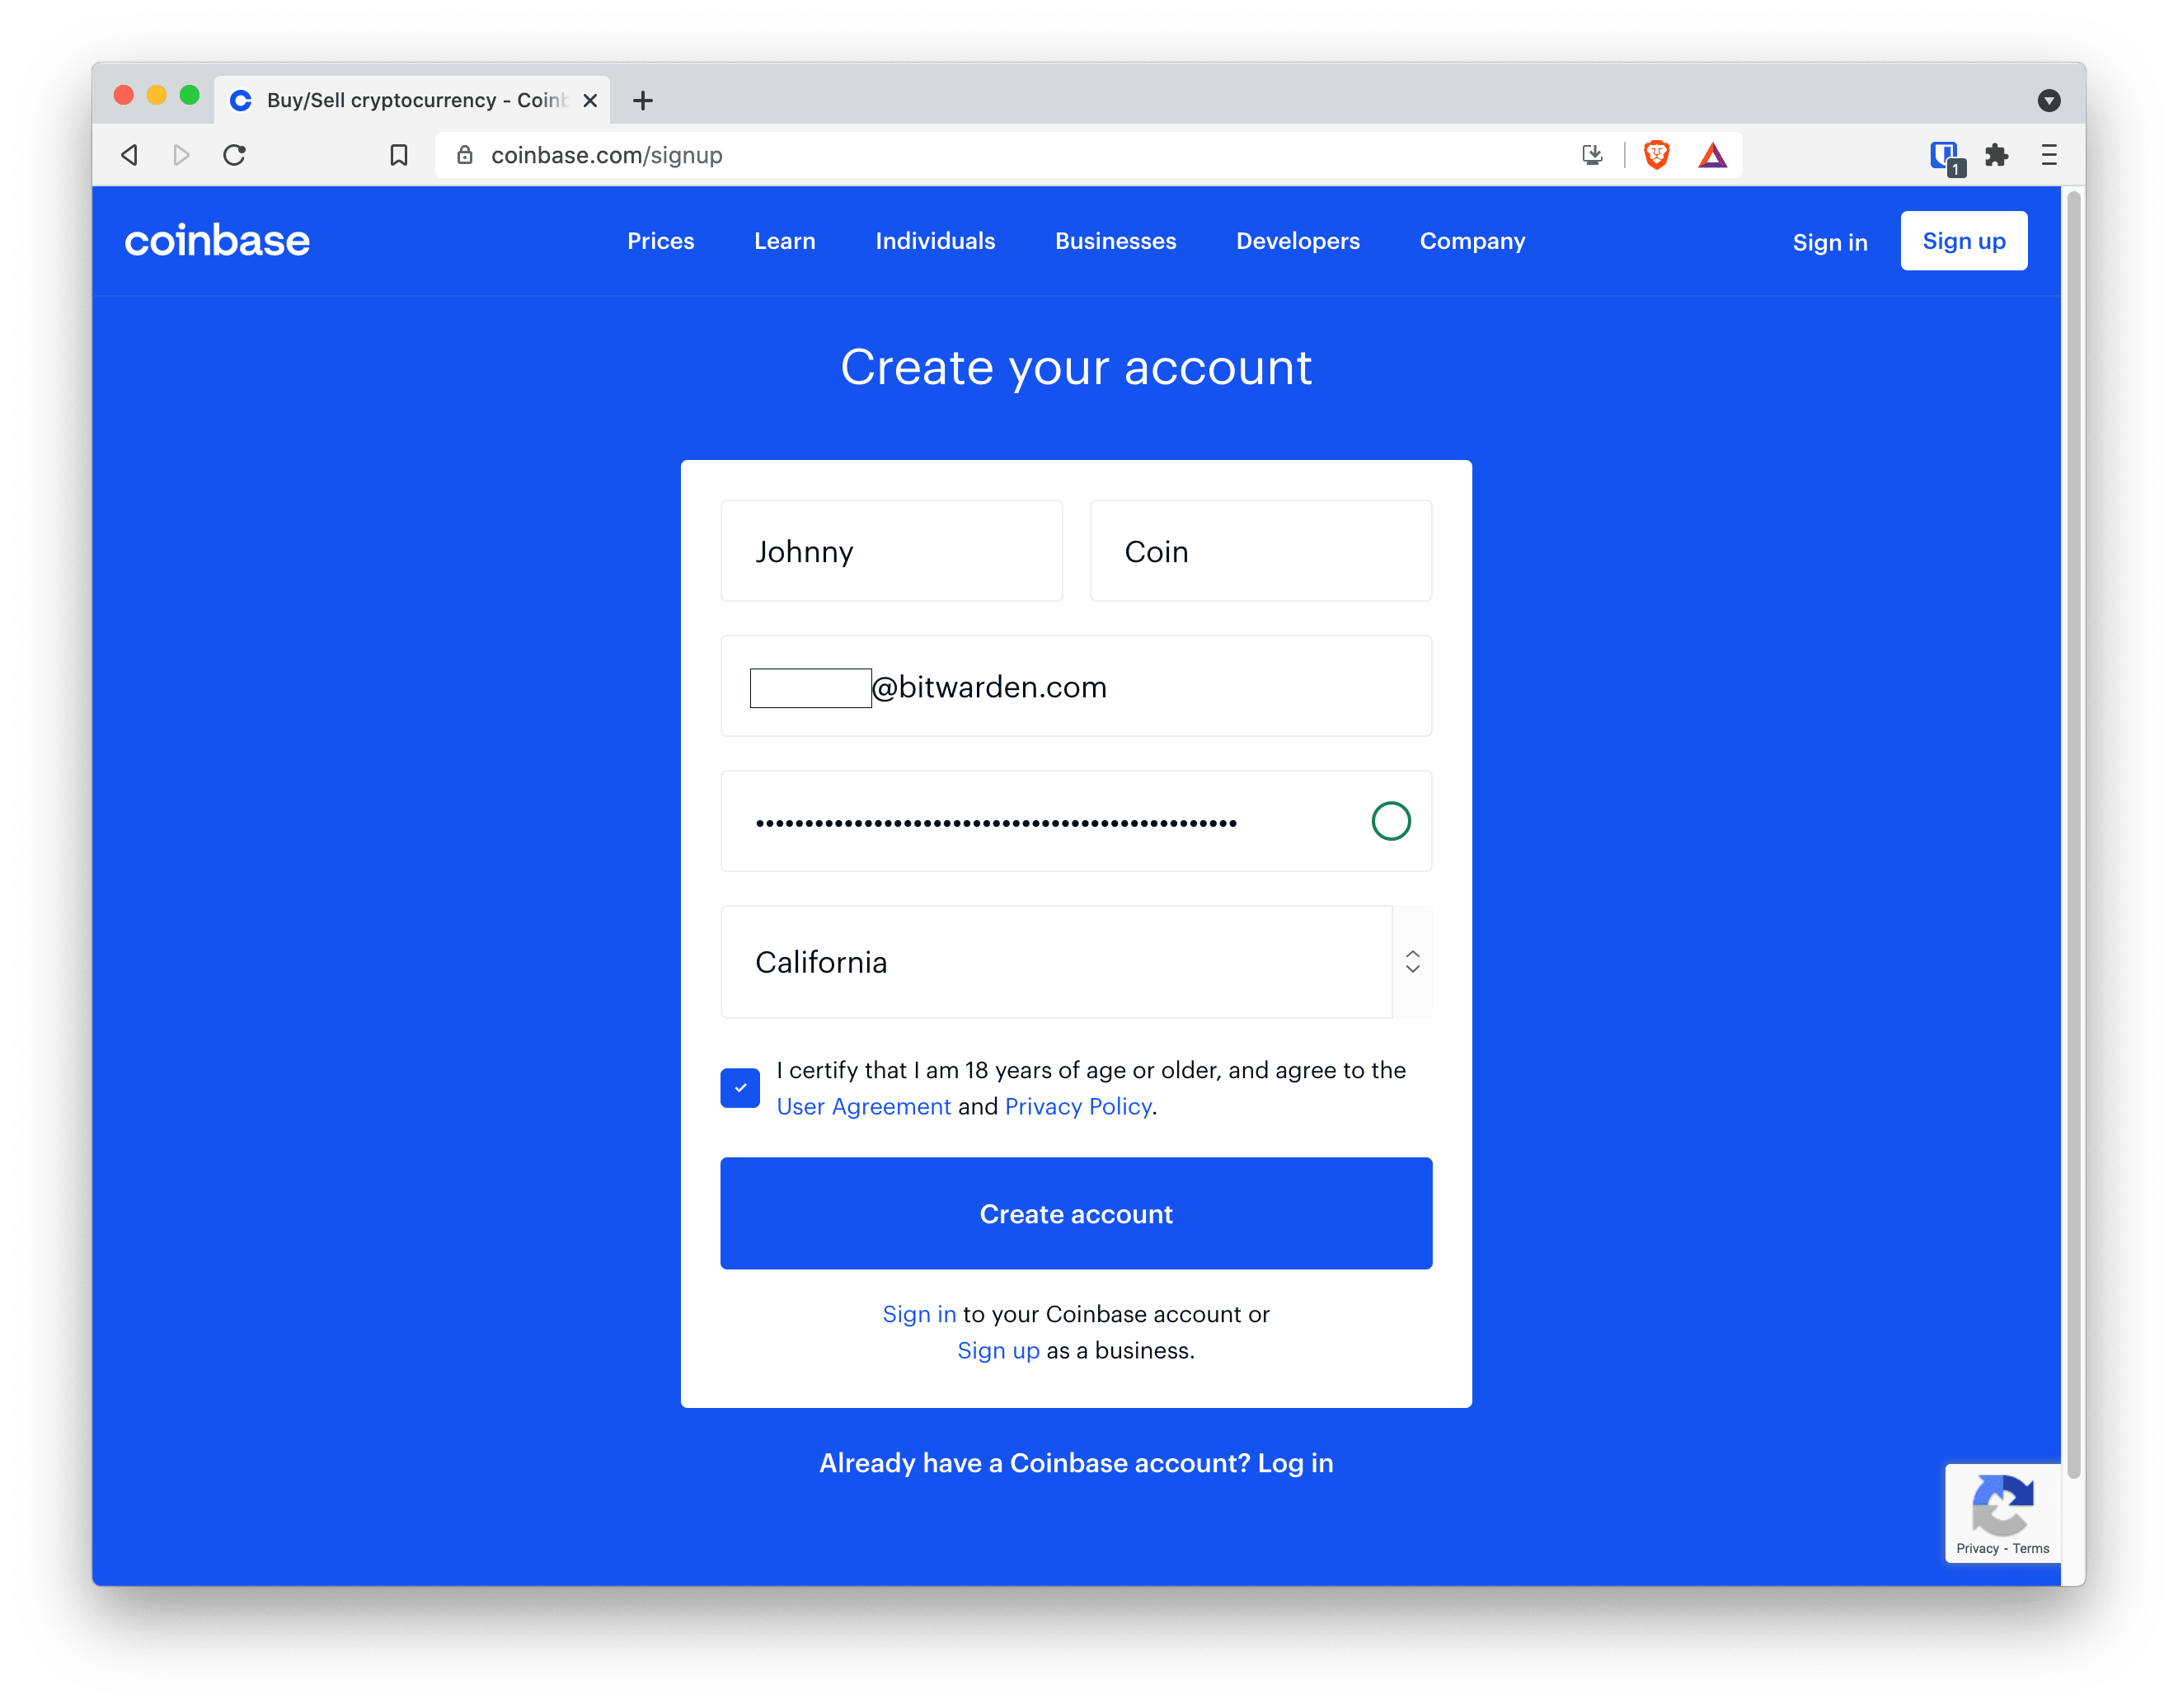 Creating your Coinbase account securely with an extra long password from your password manager